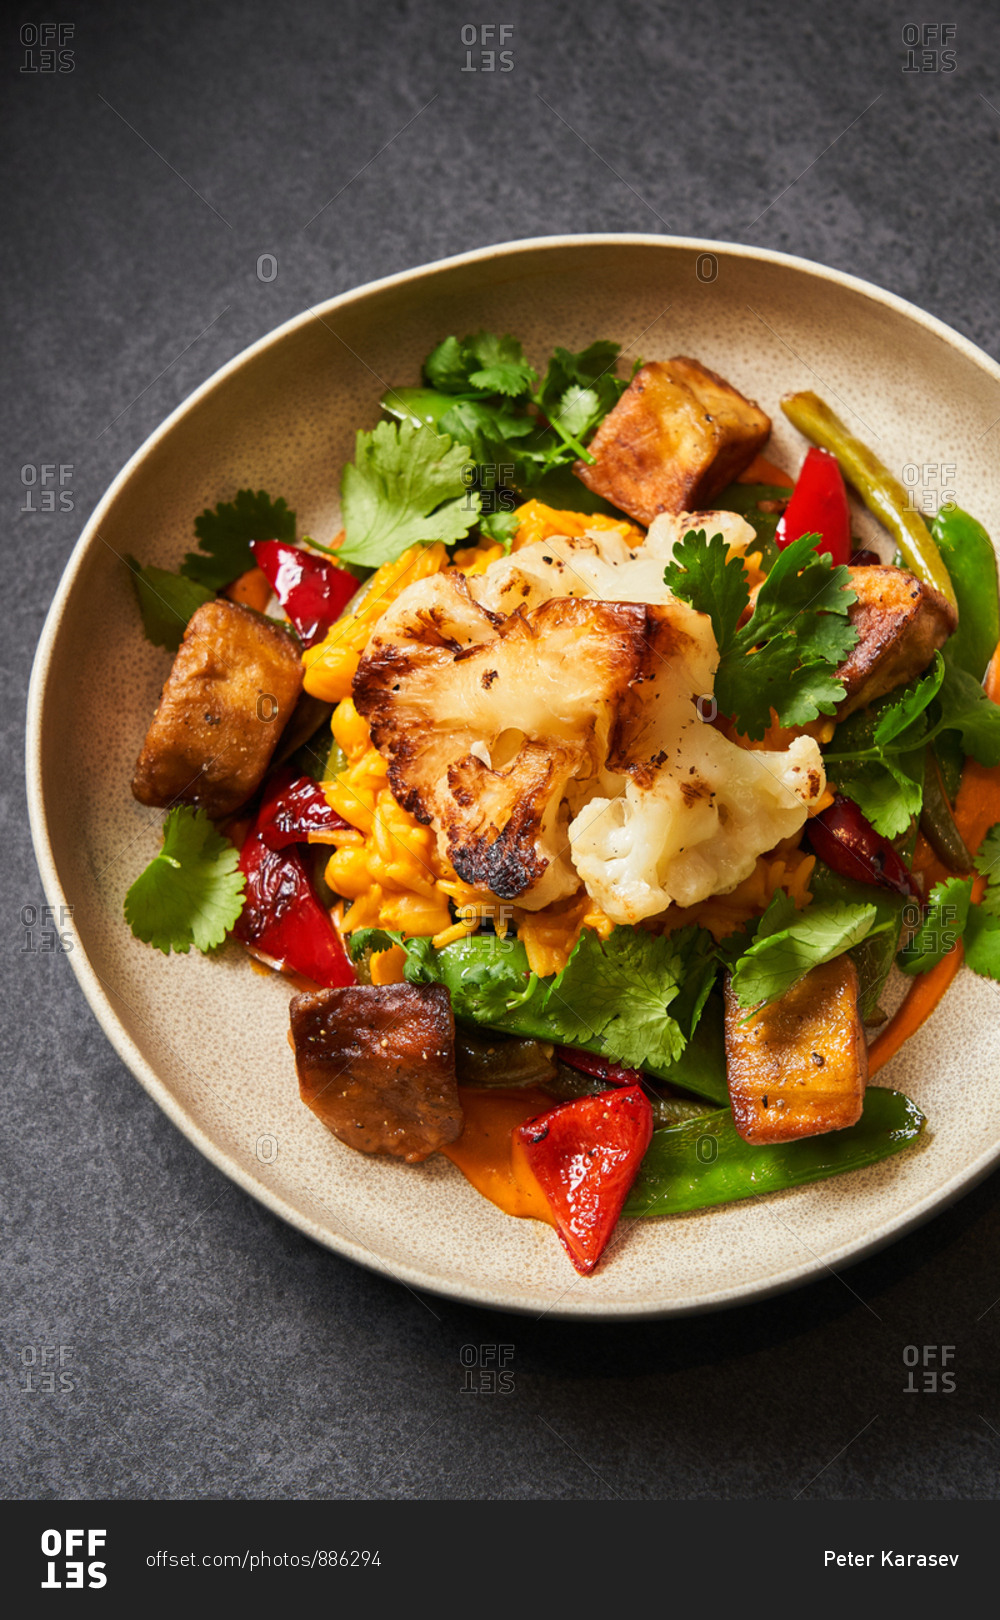 Colorful dish with grilled cauliflower and other veggies